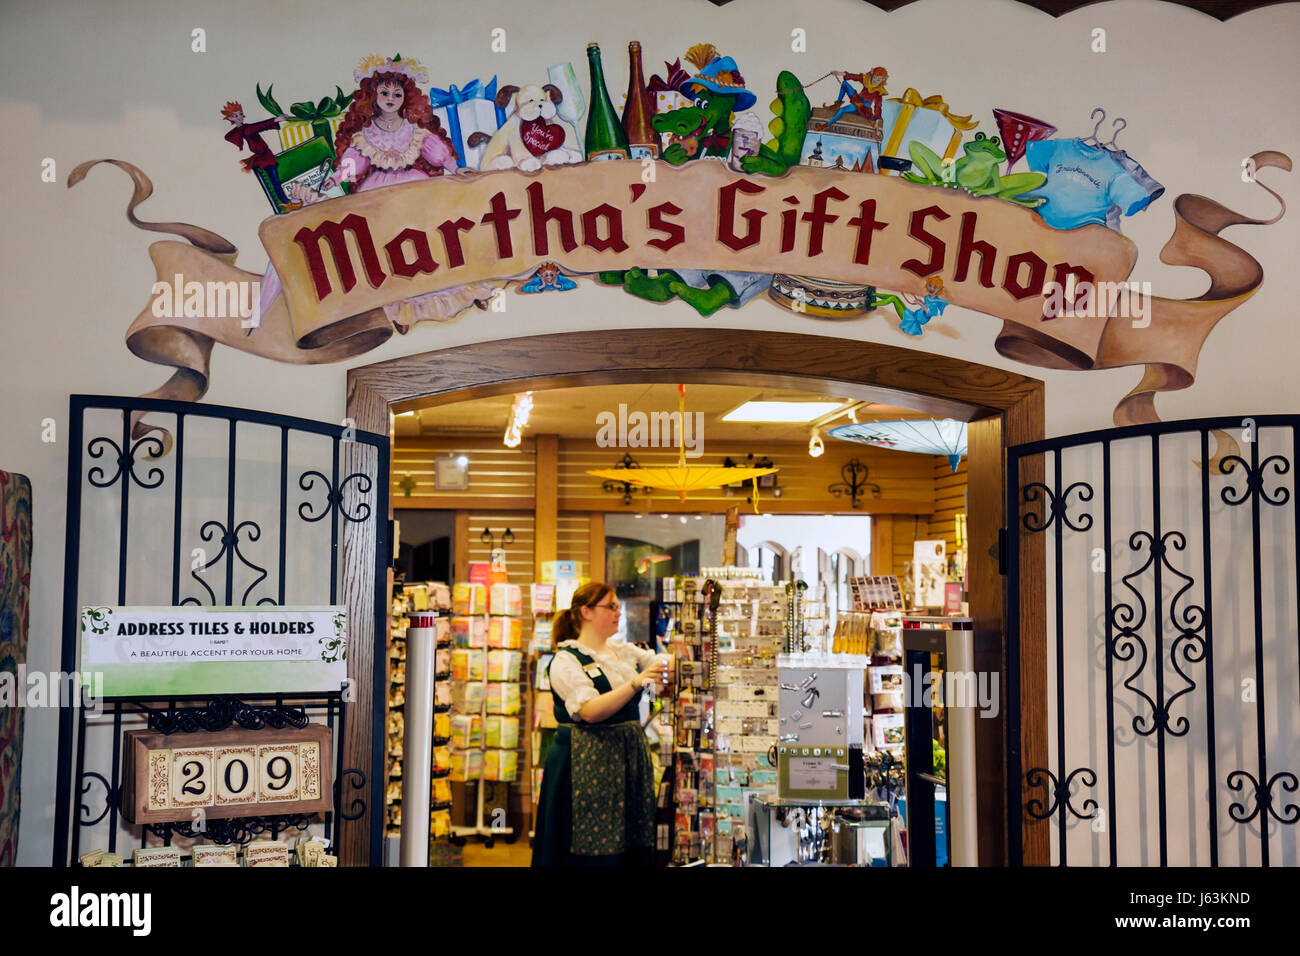 Michigan Frankenmuth,Bavarian Inn,Lodge,hotel,Martha's Gift Shop,German ethnic community,entrance,front,doorway,mural,store name,gifts souvenirs,woman Stock Photo